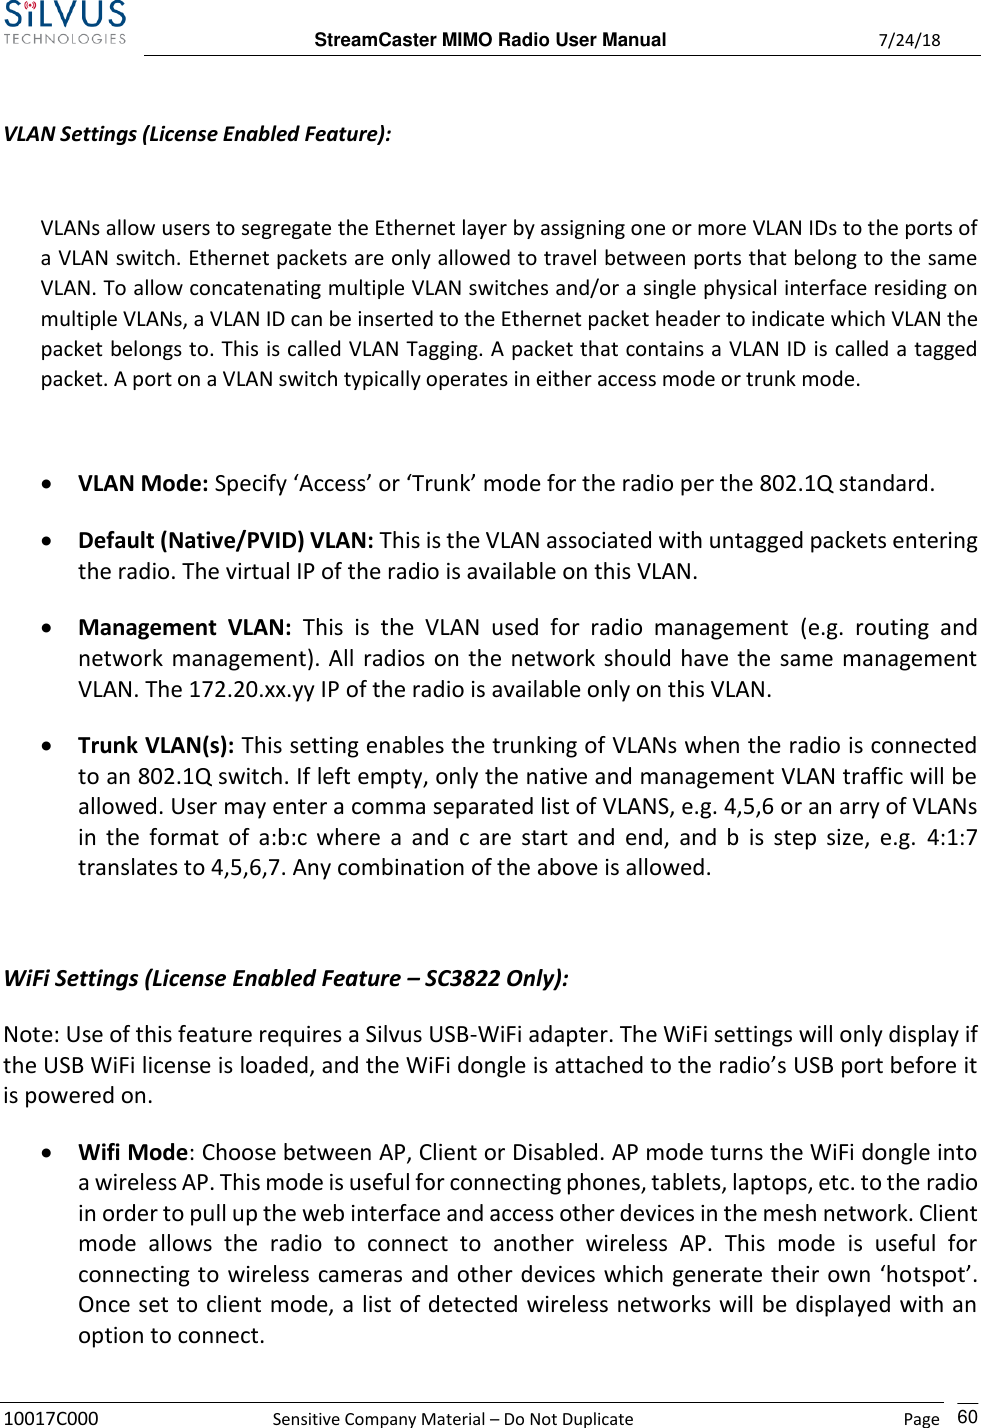  StreamCaster MIMO Radio User Manual  7/24/18 10017C000  Sensitive Company Material – Do Not Duplicate    Page    60  VLAN Settings (License Enabled Feature):  VLANs allow users to segregate the Ethernet layer by assigning one or more VLAN IDs to the ports of a VLAN switch. Ethernet packets are only allowed to travel between ports that belong to the same VLAN. To allow concatenating multiple VLAN switches and/or a single physical interface residing on multiple VLANs, a VLAN ID can be inserted to the Ethernet packet header to indicate which VLAN the packet belongs to. This is called VLAN Tagging. A packet that contains a VLAN ID is called a tagged packet. A port on a VLAN switch typically operates in either access mode or trunk mode.  • VLAN Mode: Specify ‘Access’ or ‘Trunk’ mode for the radio per the 802.1Q standard. • Default (Native/PVID) VLAN: This is the VLAN associated with untagged packets entering the radio. The virtual IP of the radio is available on this VLAN. • Management  VLAN:  This  is  the  VLAN  used  for  radio  management  (e.g.  routing  and network management). All radios on the network should have the same management VLAN. The 172.20.xx.yy IP of the radio is available only on this VLAN. • Trunk VLAN(s): This setting enables the trunking of VLANs when the radio is connected to an 802.1Q switch. If left empty, only the native and management VLAN traffic will be allowed. User may enter a comma separated list of VLANS, e.g. 4,5,6 or an arry of VLANs in  the format of  a:b:c where a and  c  are  start and end, and  b  is step size,  e.g.  4:1:7 translates to 4,5,6,7. Any combination of the above is allowed.  WiFi Settings (License Enabled Feature – SC3822 Only): Note: Use of this feature requires a Silvus USB-WiFi adapter. The WiFi settings will only display if the USB WiFi license is loaded, and the WiFi dongle is attached to the radio’s USB port before it is powered on. • Wifi Mode: Choose between AP, Client or Disabled. AP mode turns the WiFi dongle into a wireless AP. This mode is useful for connecting phones, tablets, laptops, etc. to the radio in order to pull up the web interface and access other devices in the mesh network. Client mode  allows  the  radio  to  connect  to  another  wireless  AP.  This  mode  is  useful  for connecting to wireless cameras and other devices which generate their own ‘hotspot’. Once set to client mode, a list of detected wireless networks will be displayed with an option to connect. 